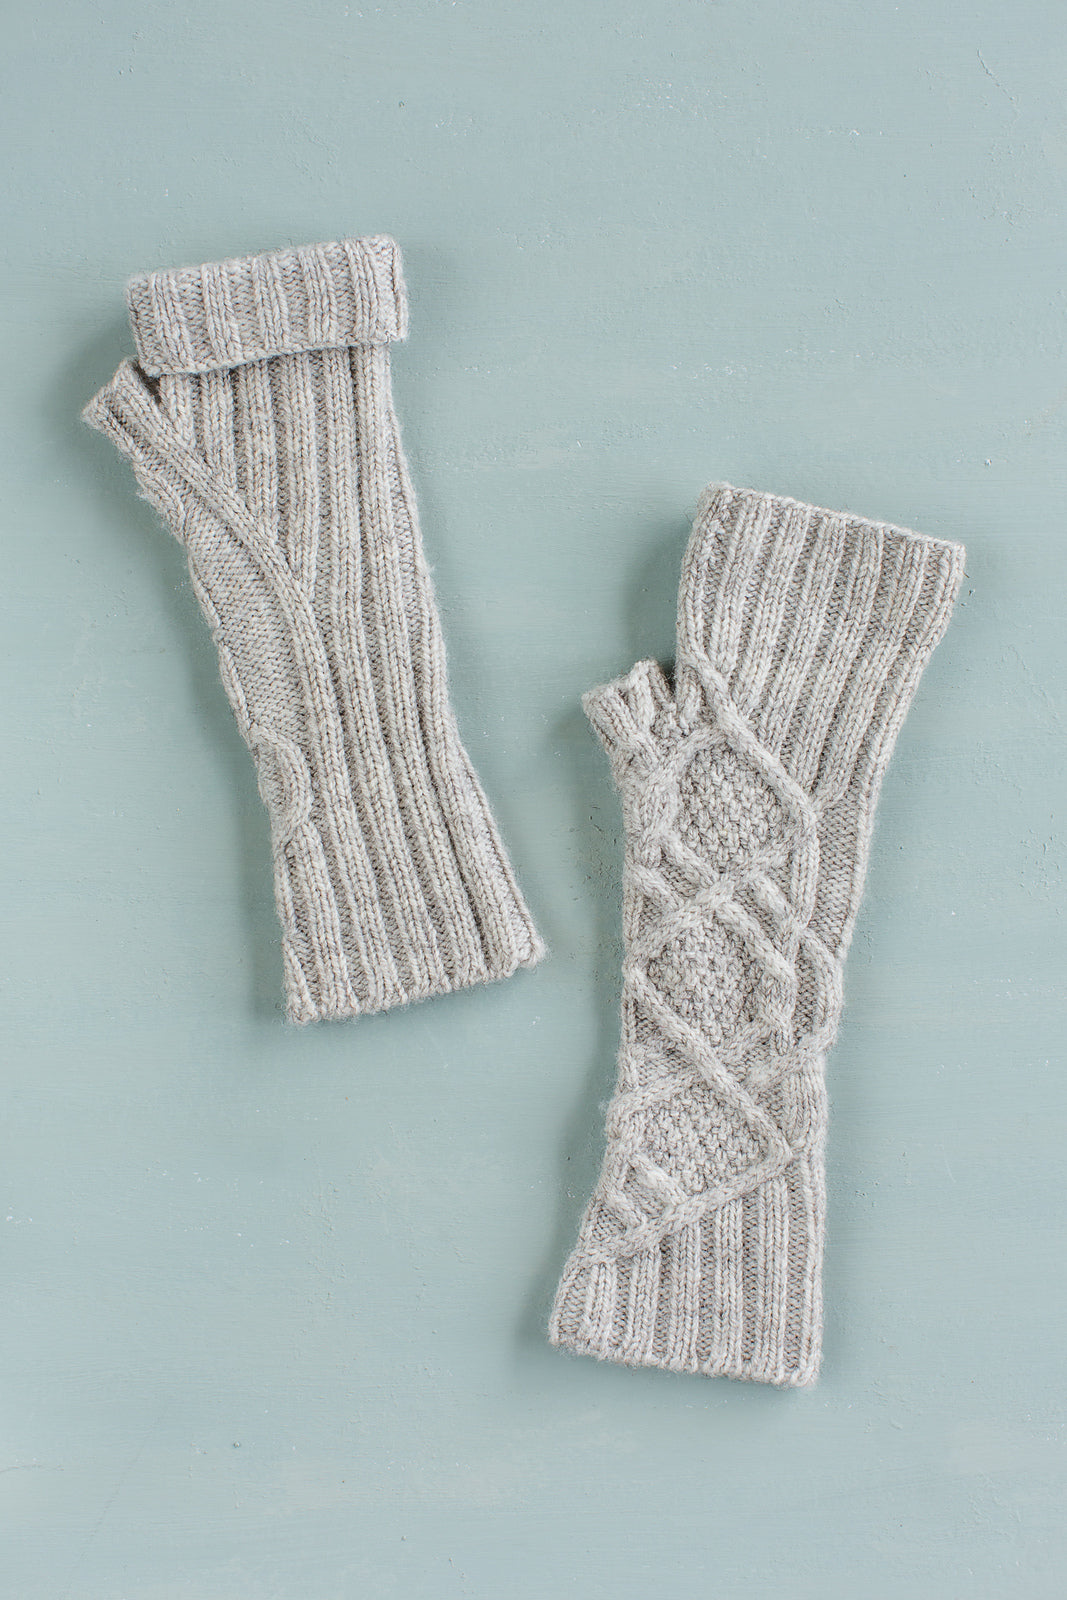 Knitting pattern for Inglis cable mittens by Ysolda Teague